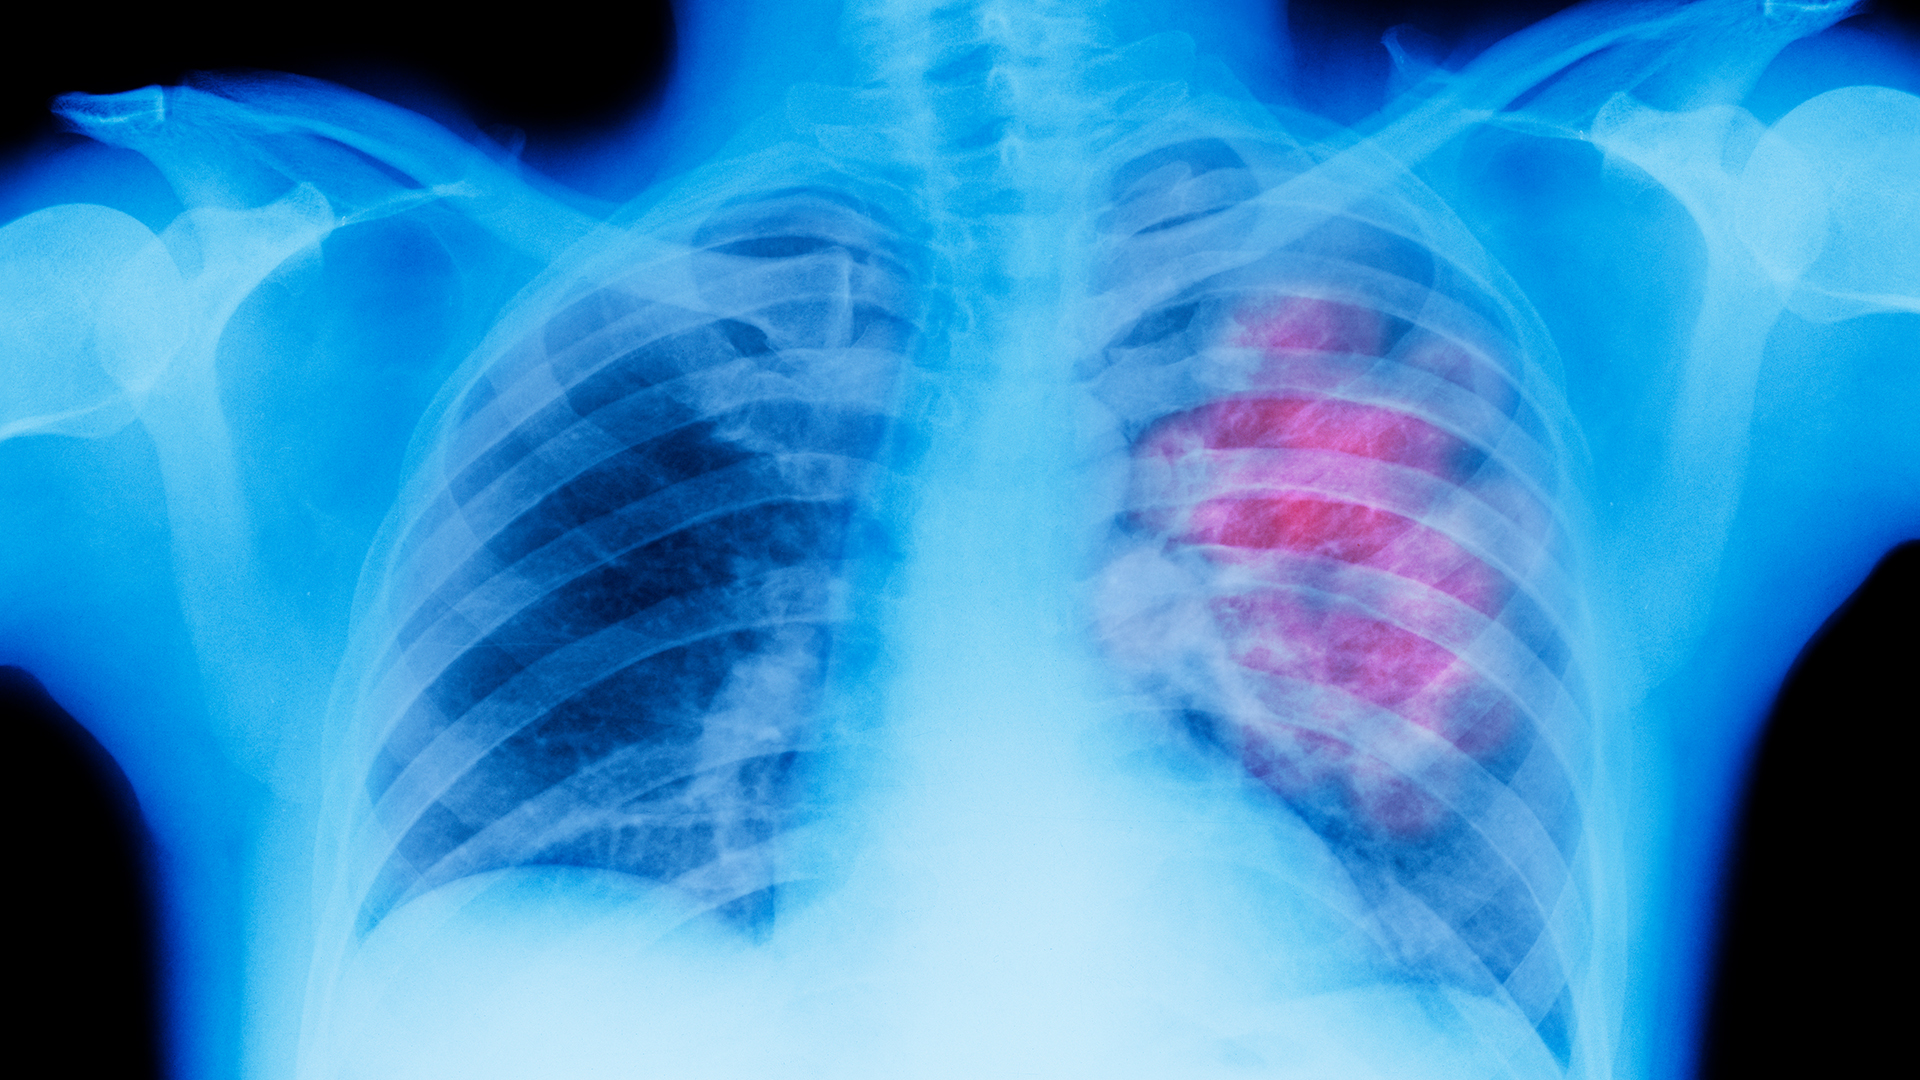 A.I. Took a Test to Detect Lung Cancer. It Got an A. - The New